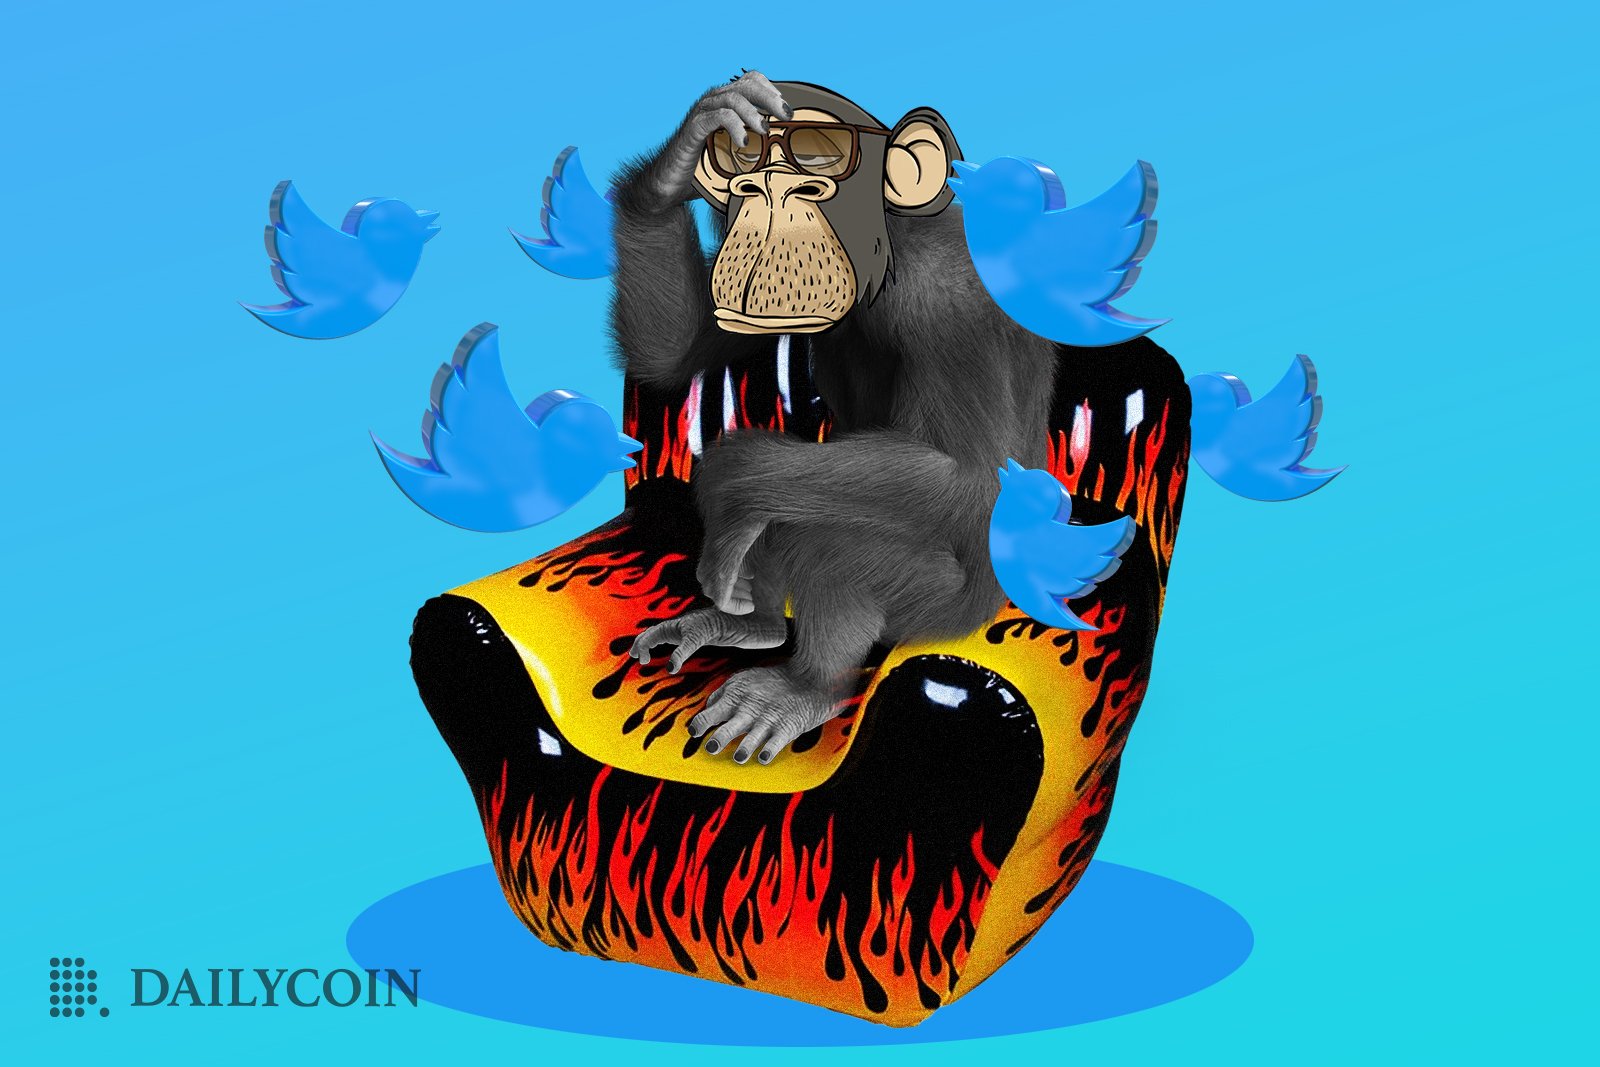 A cartoon monkey with glasses sitting on a hot seat, getting roasted by blue Twitter birds.